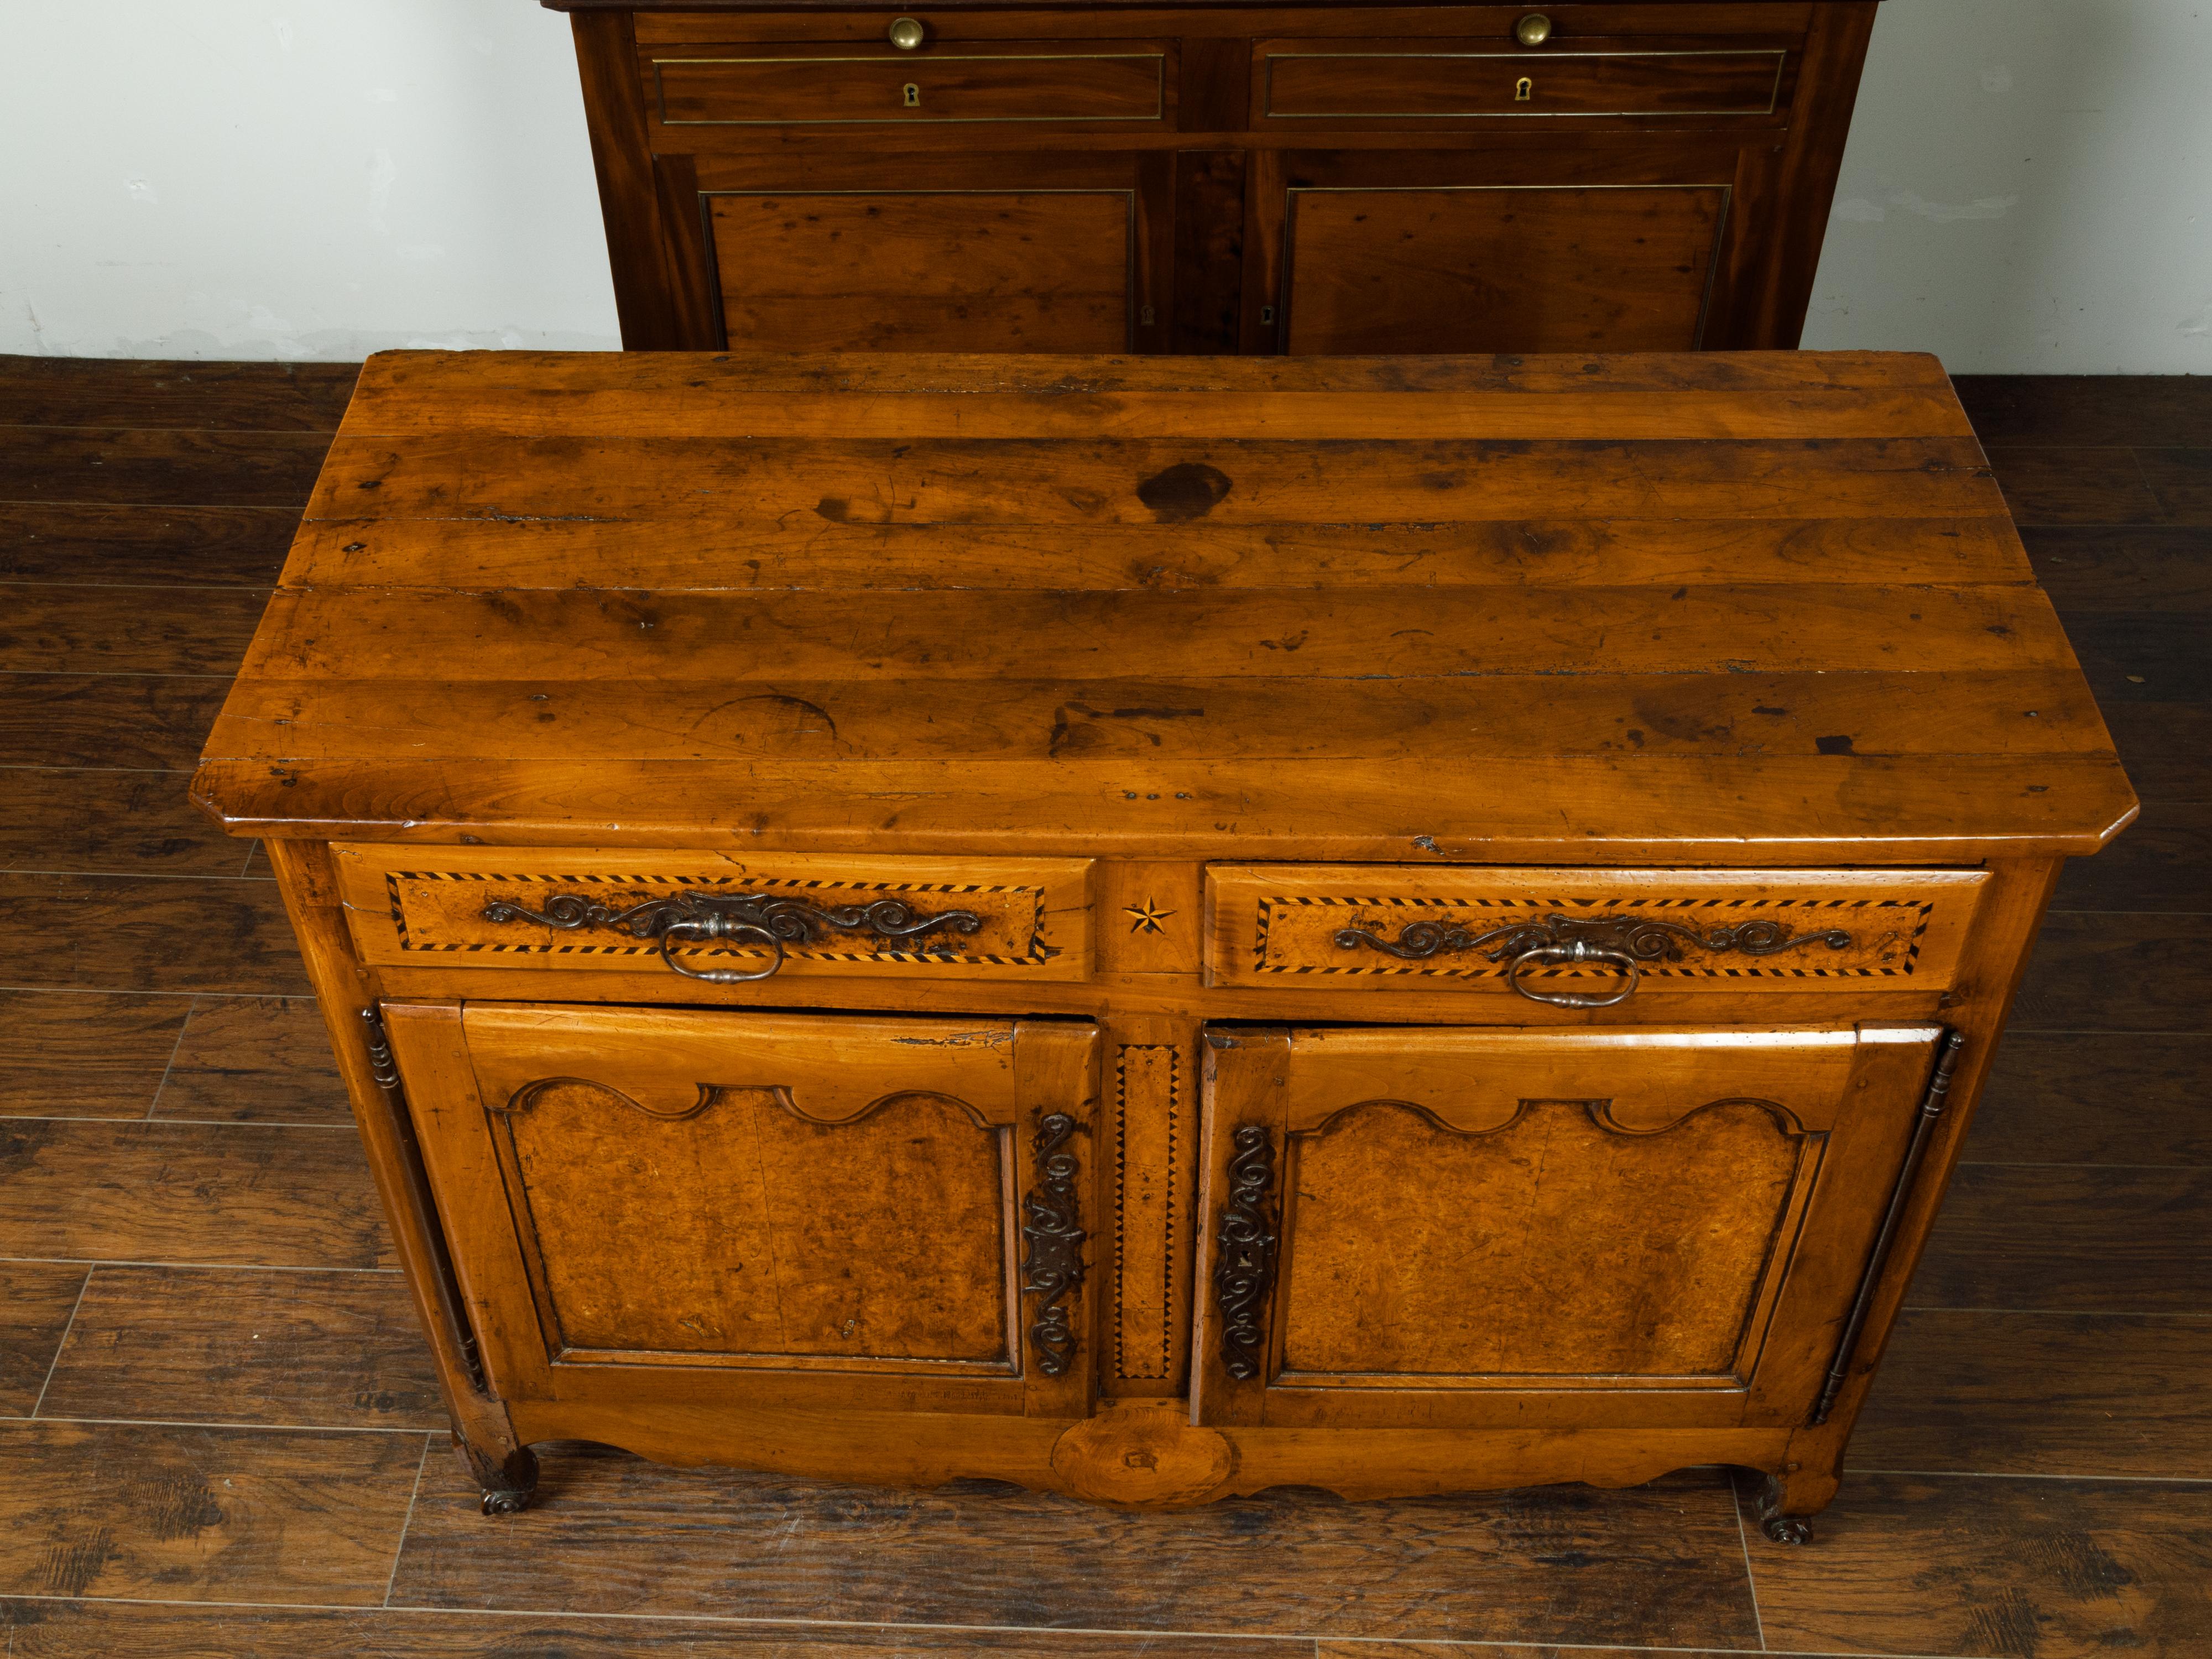 A French buffet from the early 19th century, with two drawers, two doors and burl accents. Created in France during the early years of the 19th century, this buffet features a rectangular planked top with canted corners in the front, sitting above